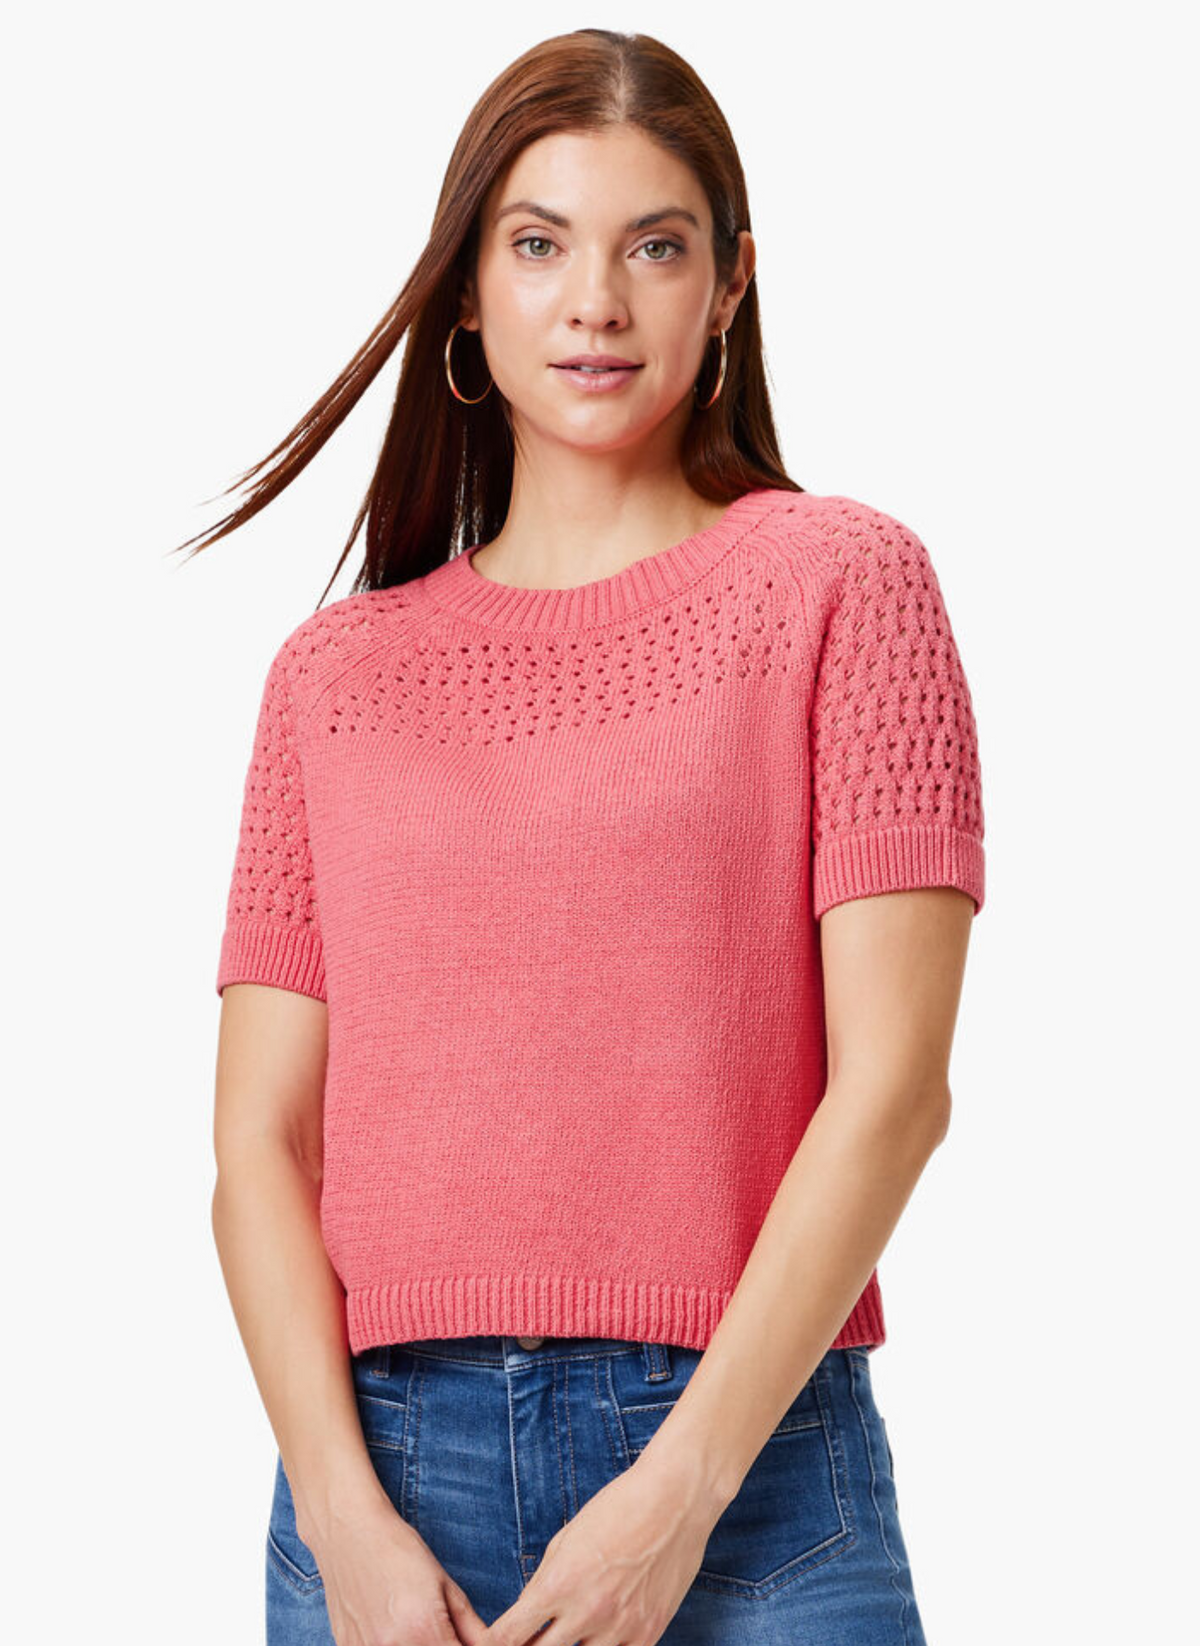 Placed Crochet Sweater